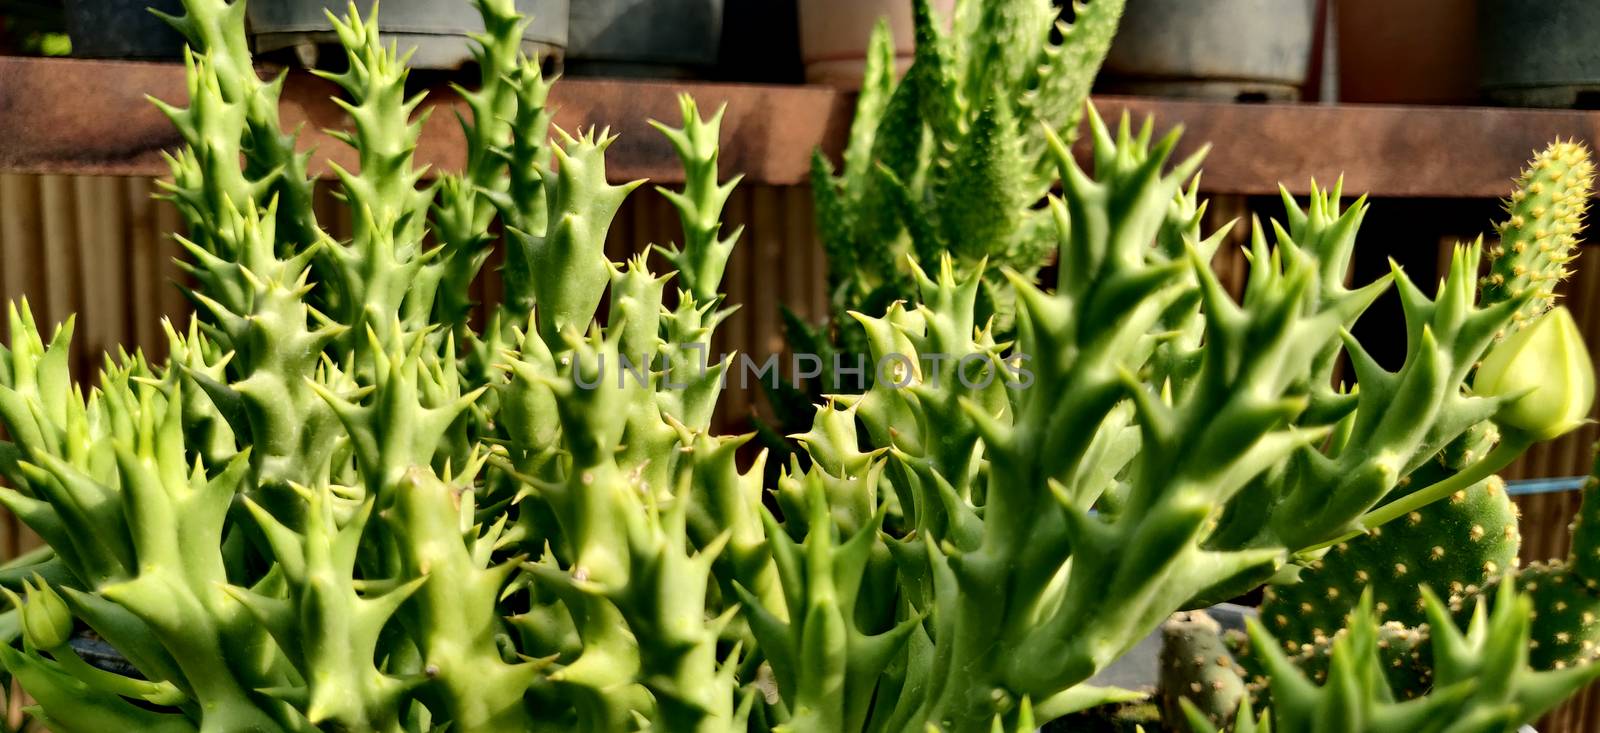 Stapelia succulent plant with thorns in nursery by mshivangi92